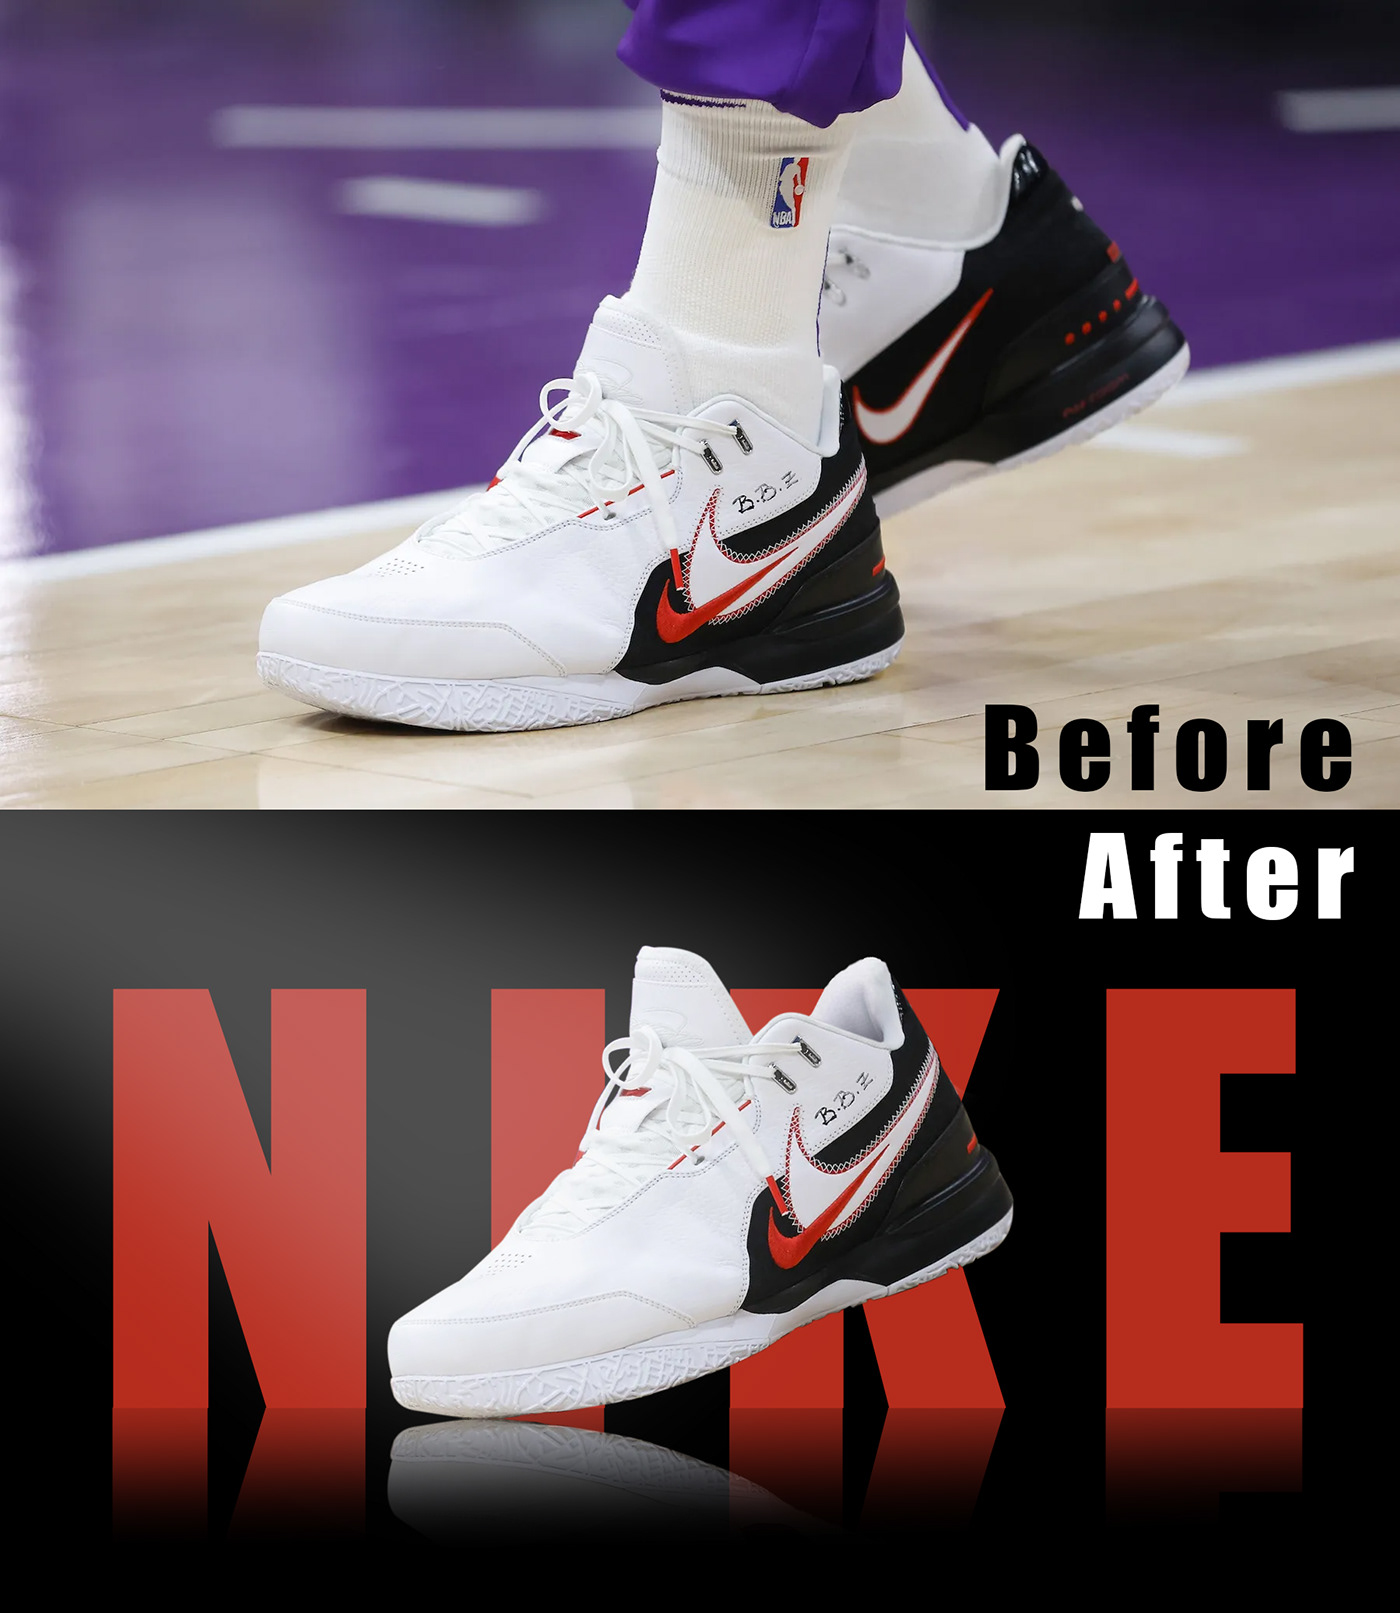 product Product Editing Background Remove Adobe Photoshop Nike Shoes productdesign graphic design  photoediting image edit Shoe Editing